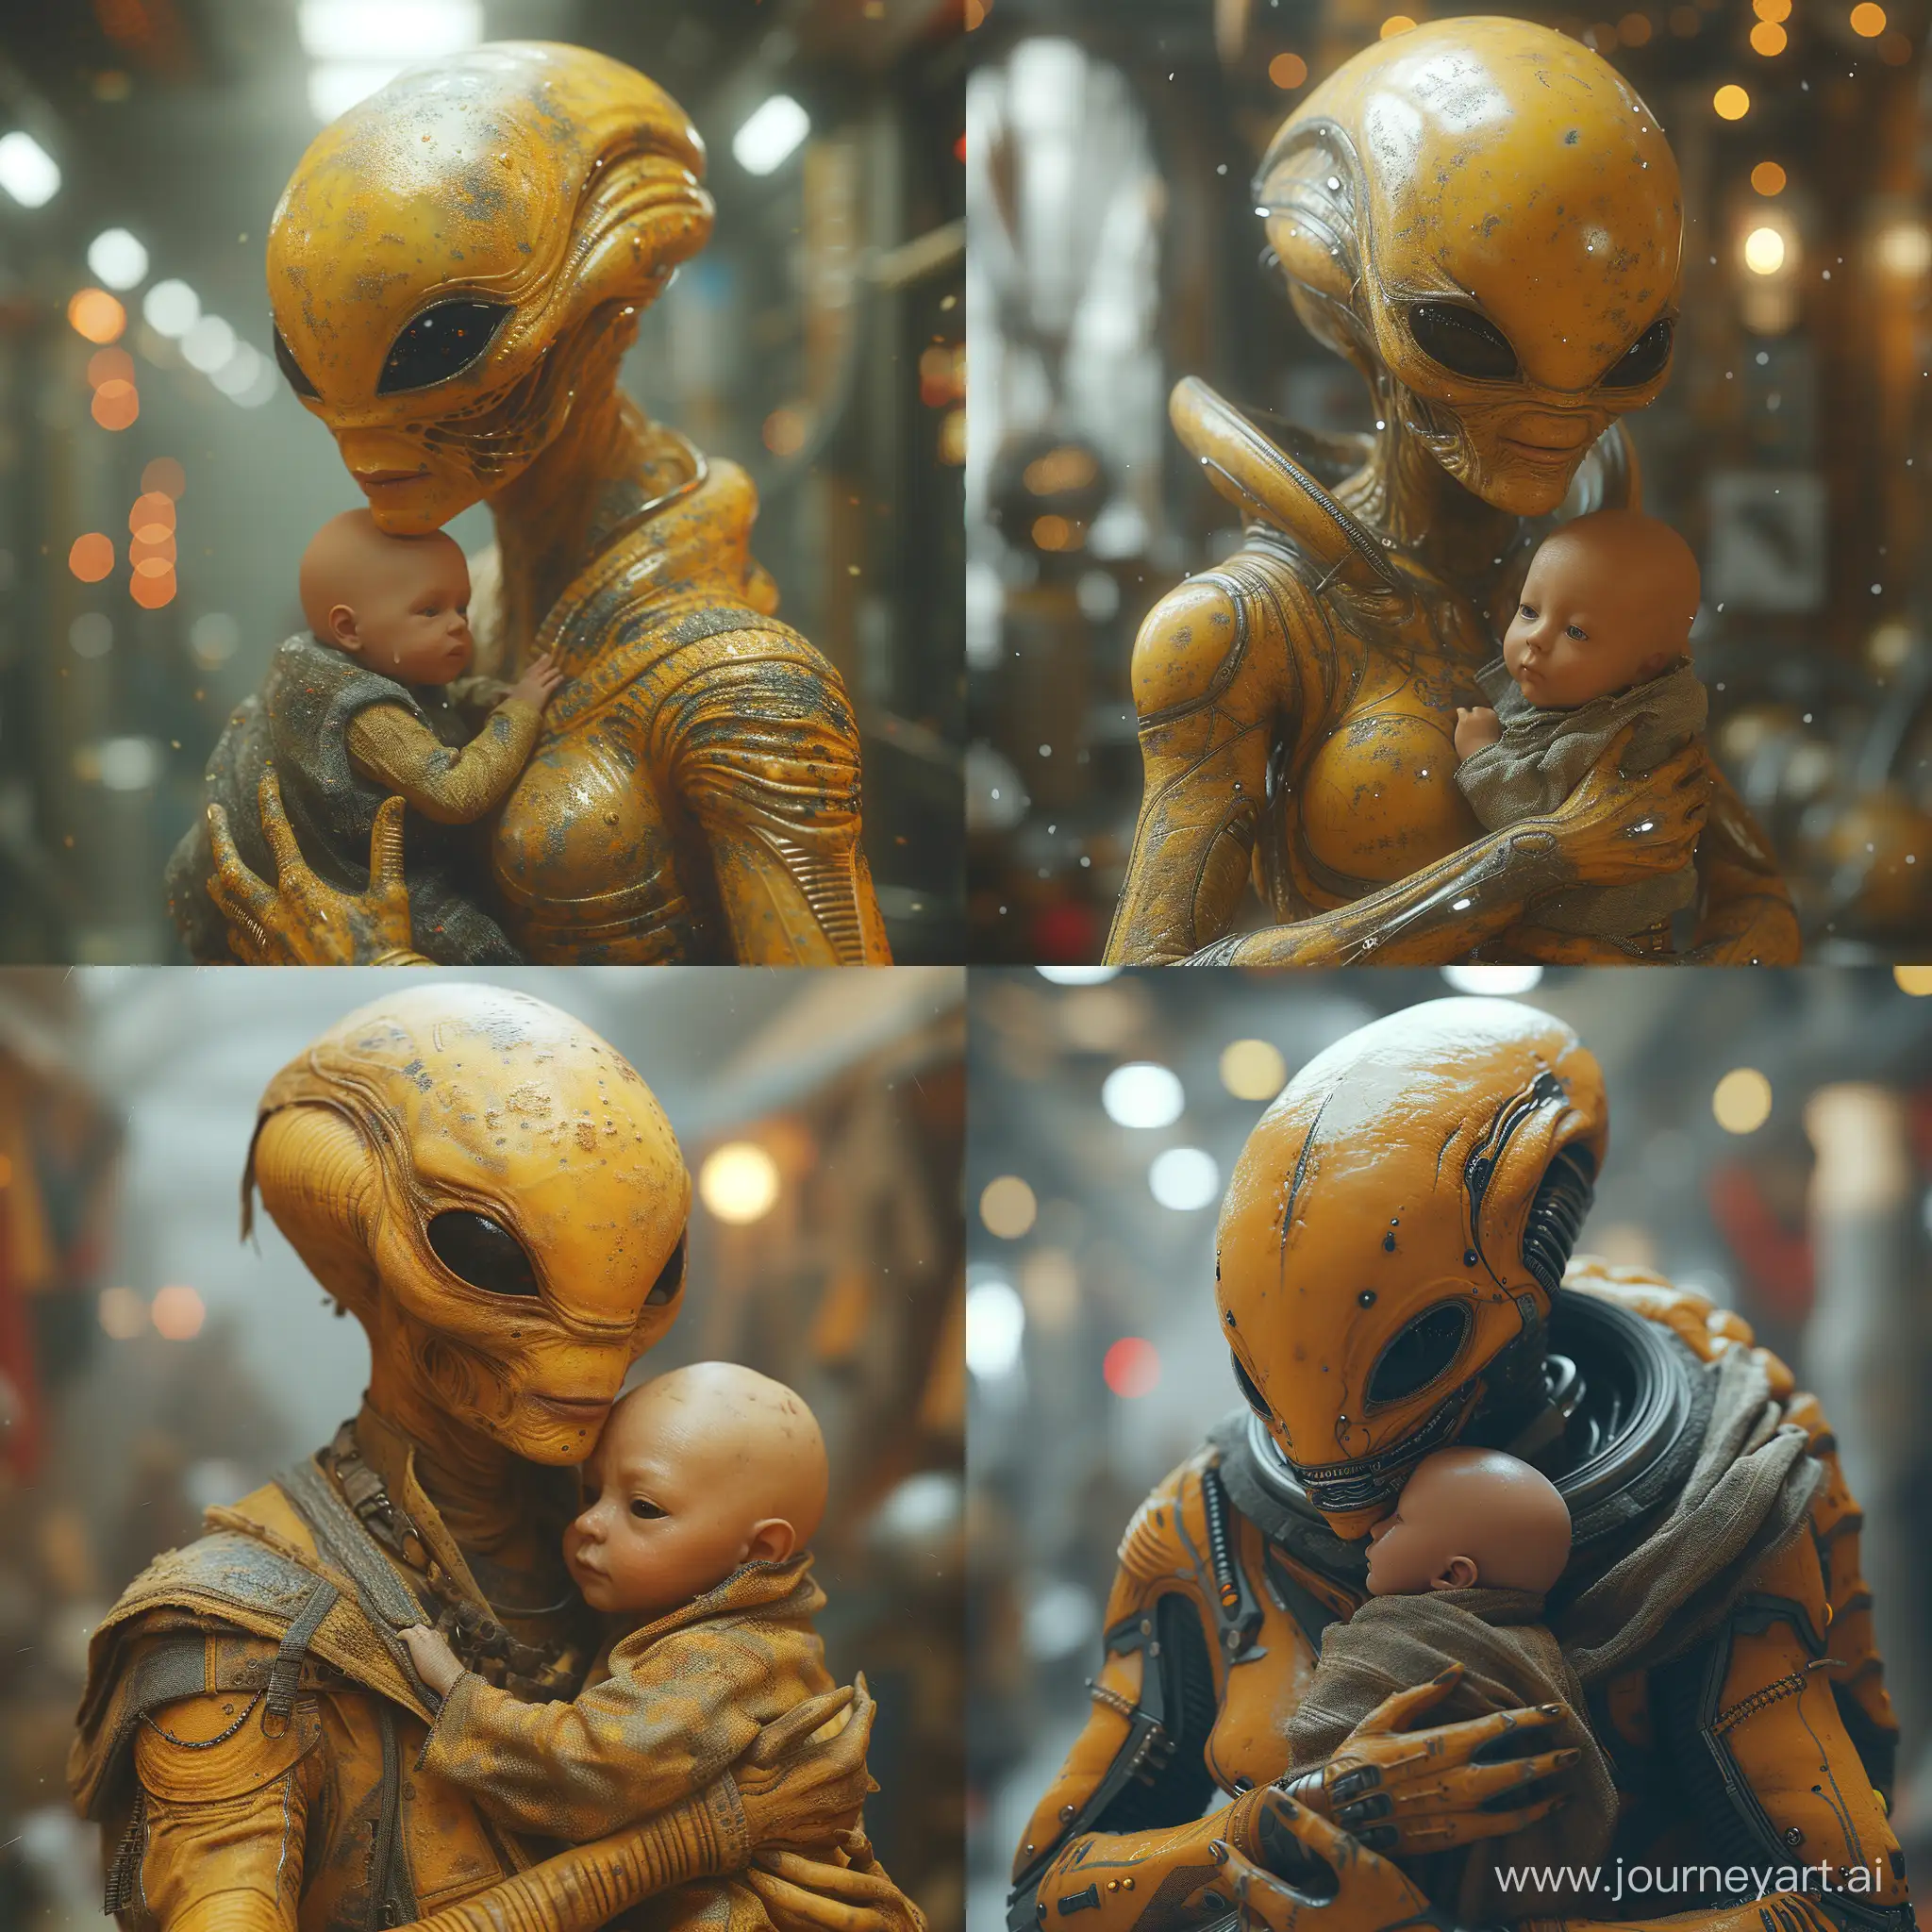 Intergalactic-Love-Yellow-Alien-Caring-for-Human-Baby-in-Space-Room